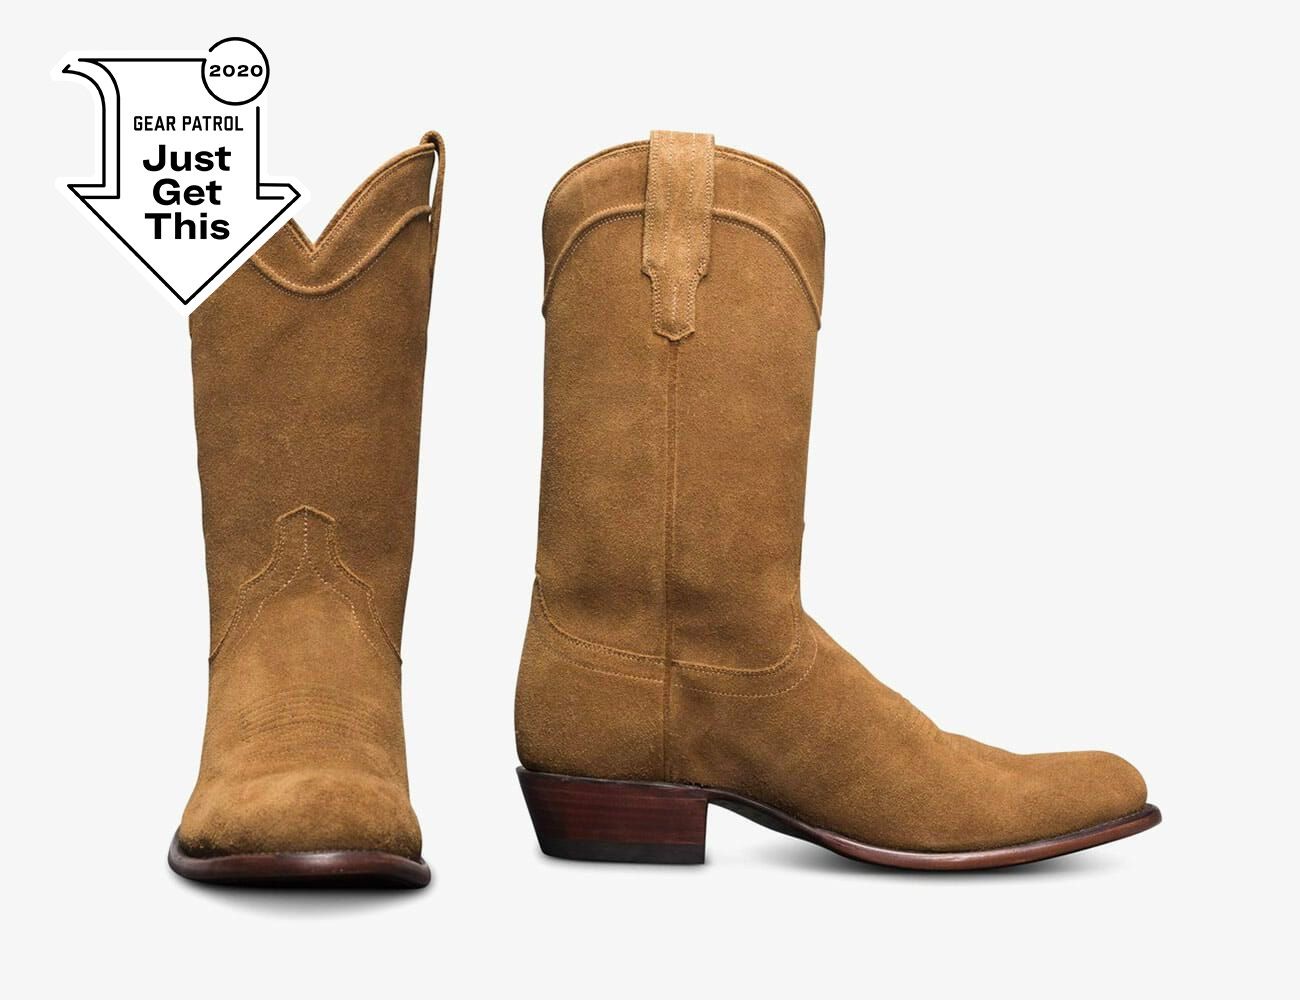 the best western boots